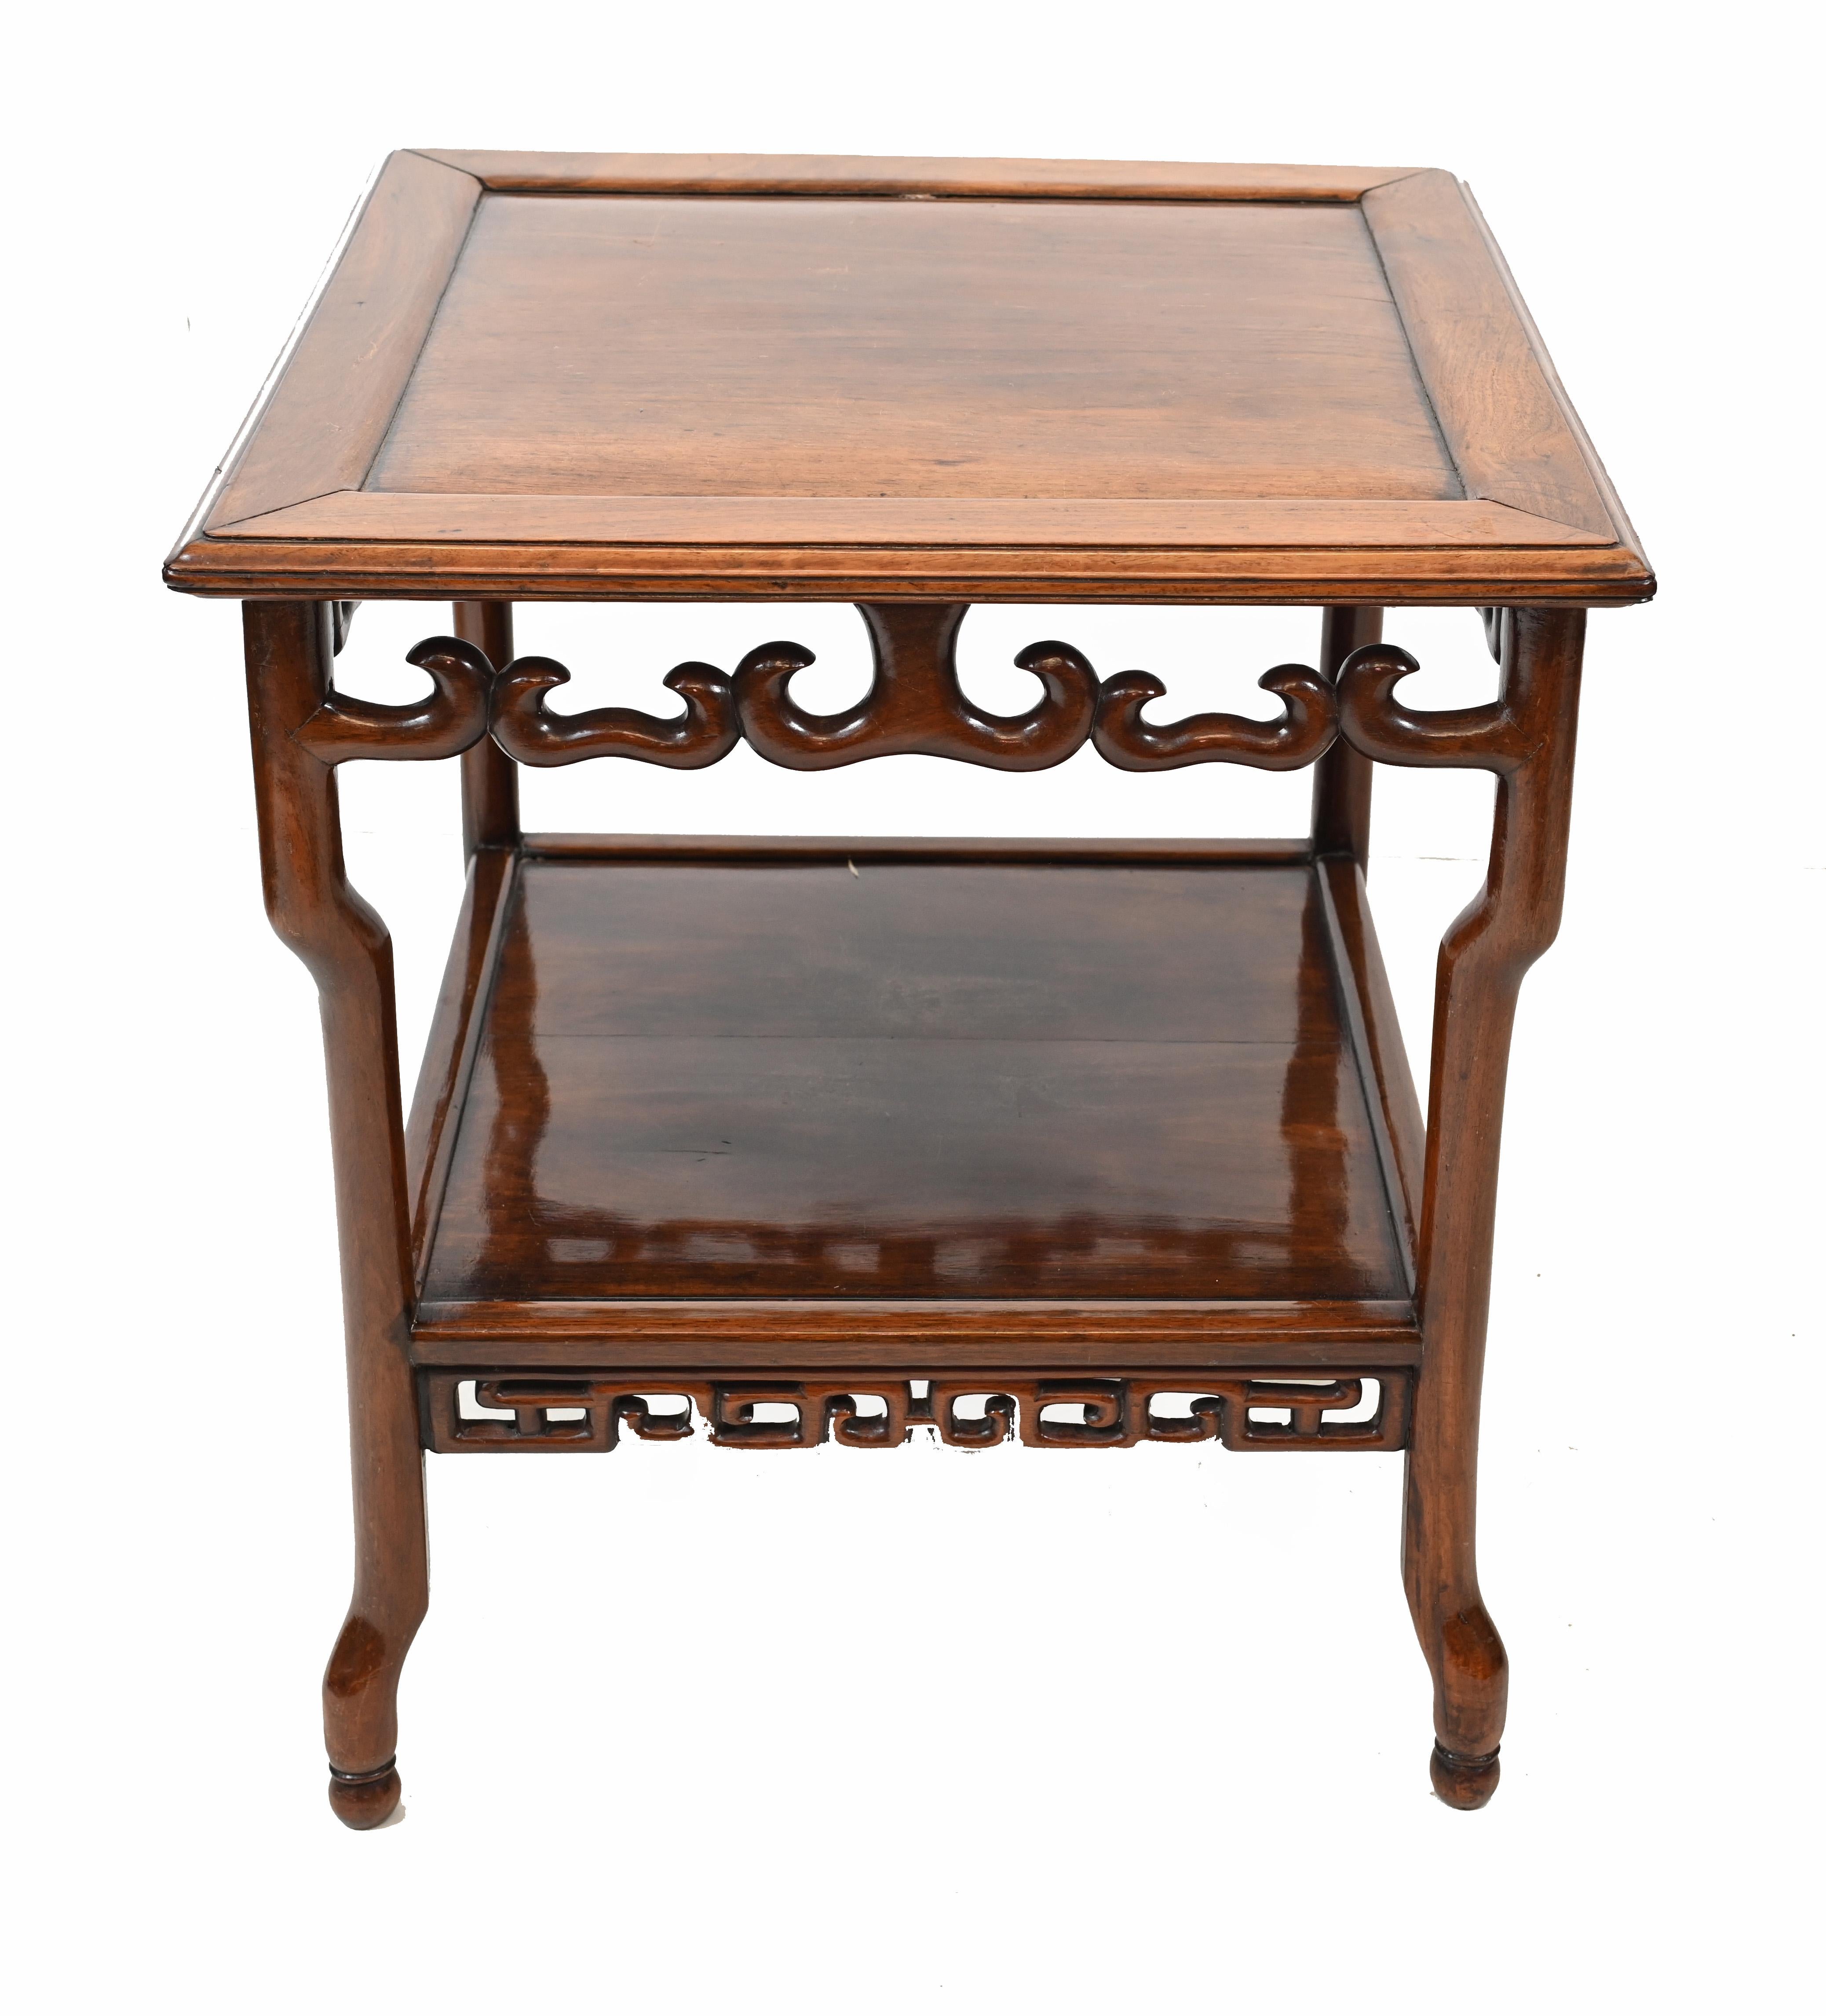 Gorgeous Chinese antique side table in hardwood
We date this piece to circa 1880
Delicate designs to rail and a great look for an Asian inspired interior
 


 